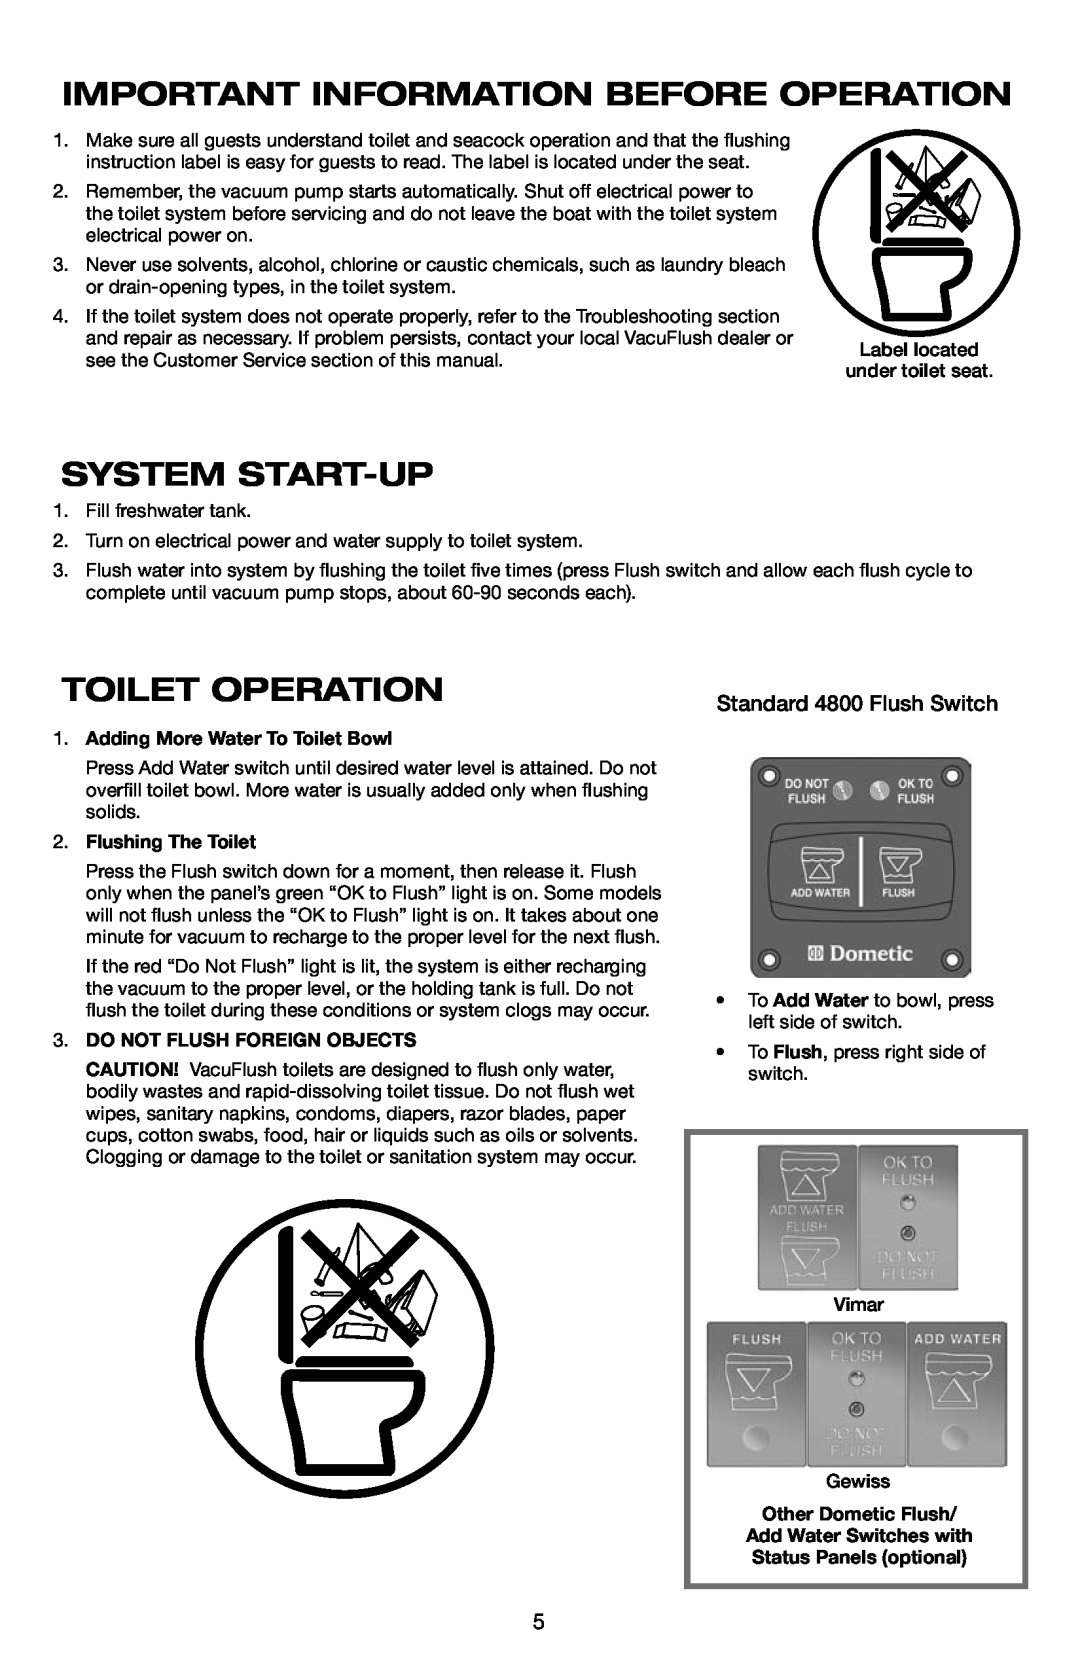 Dometic 4848 Important Information Before Operation, System Start-up, Toilet Operation, Adding More Water To Toilet Bowl 